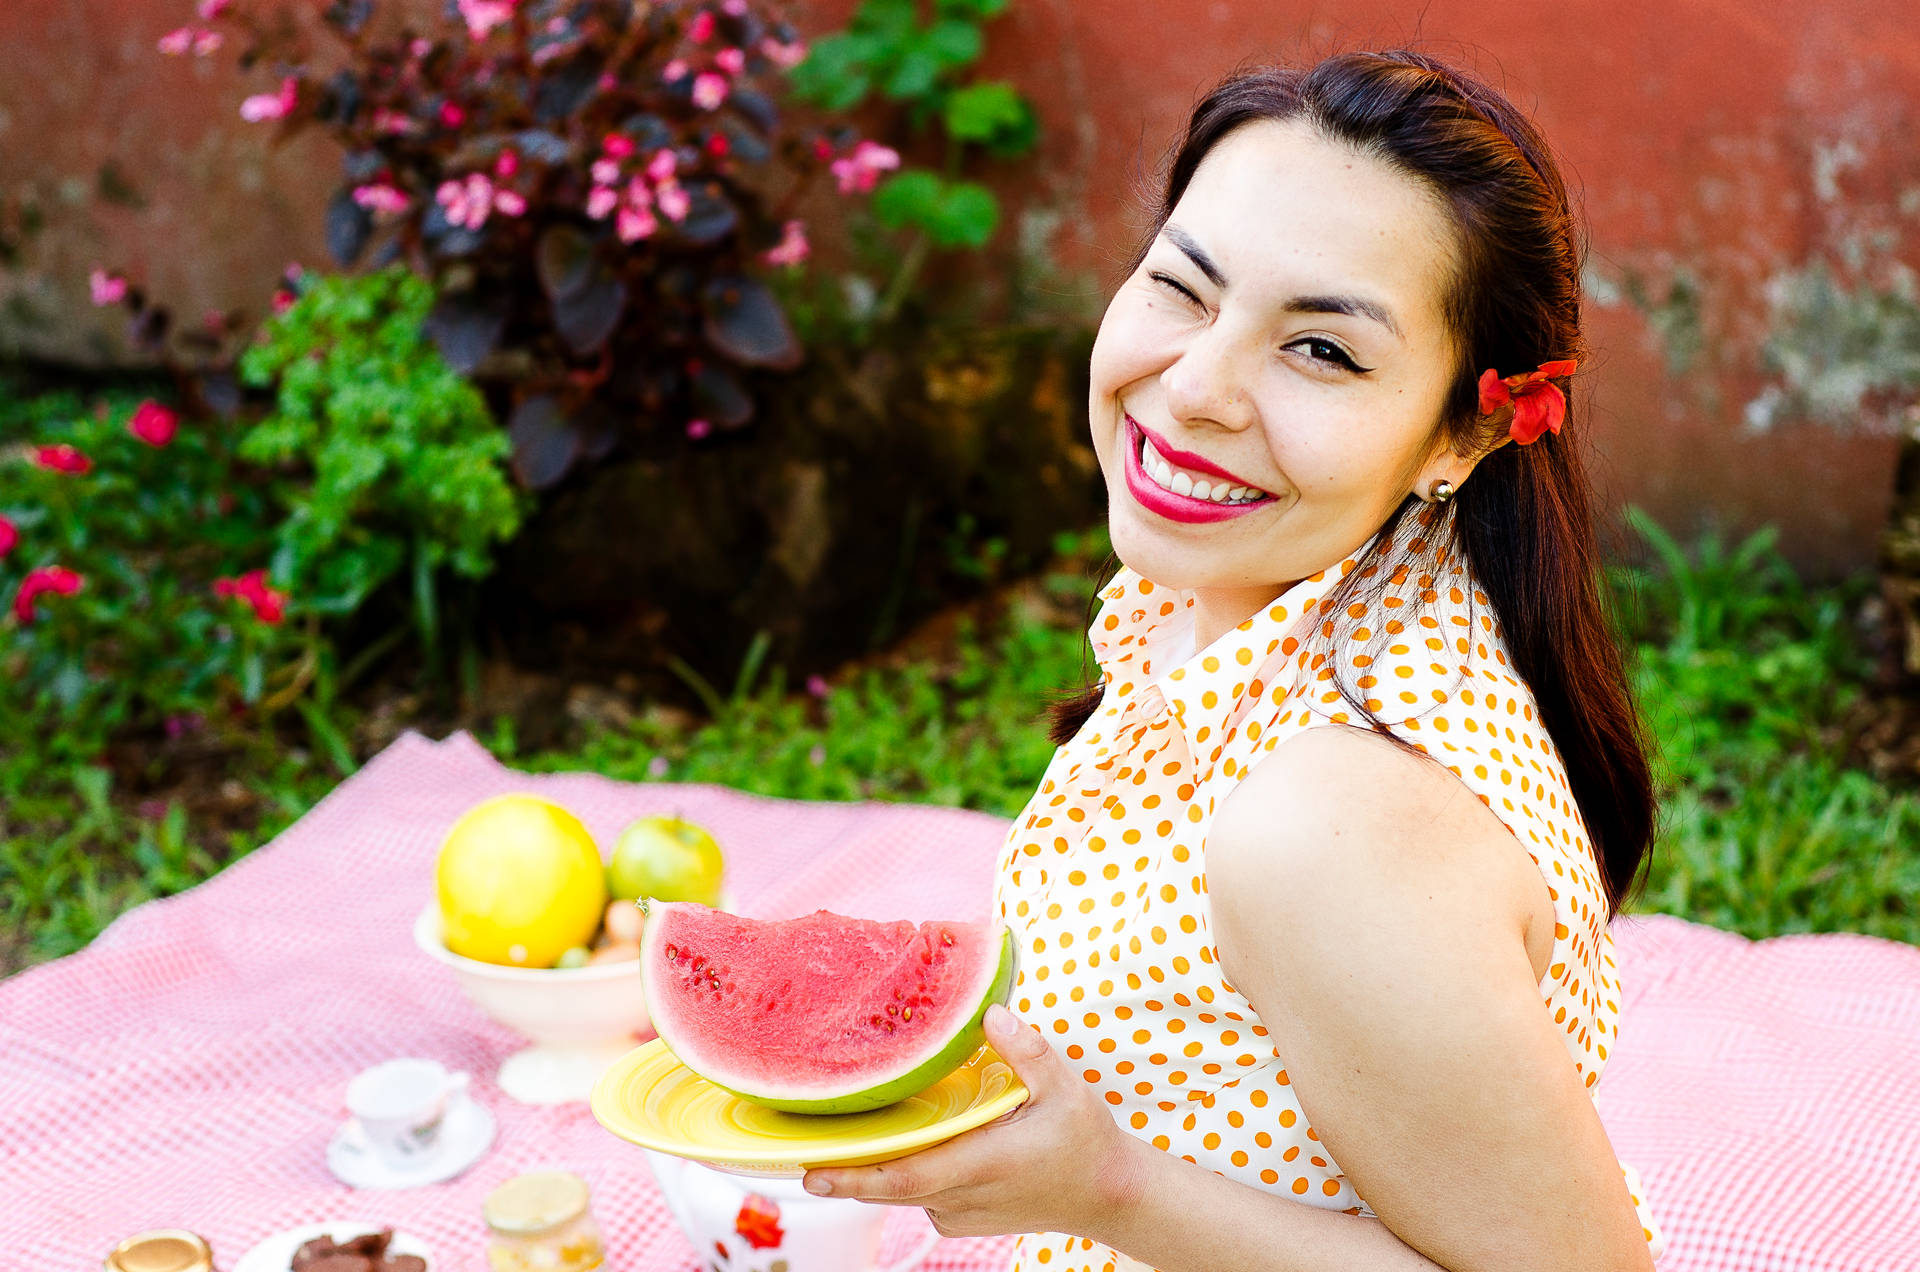 Winking Lady With Watermelon Background